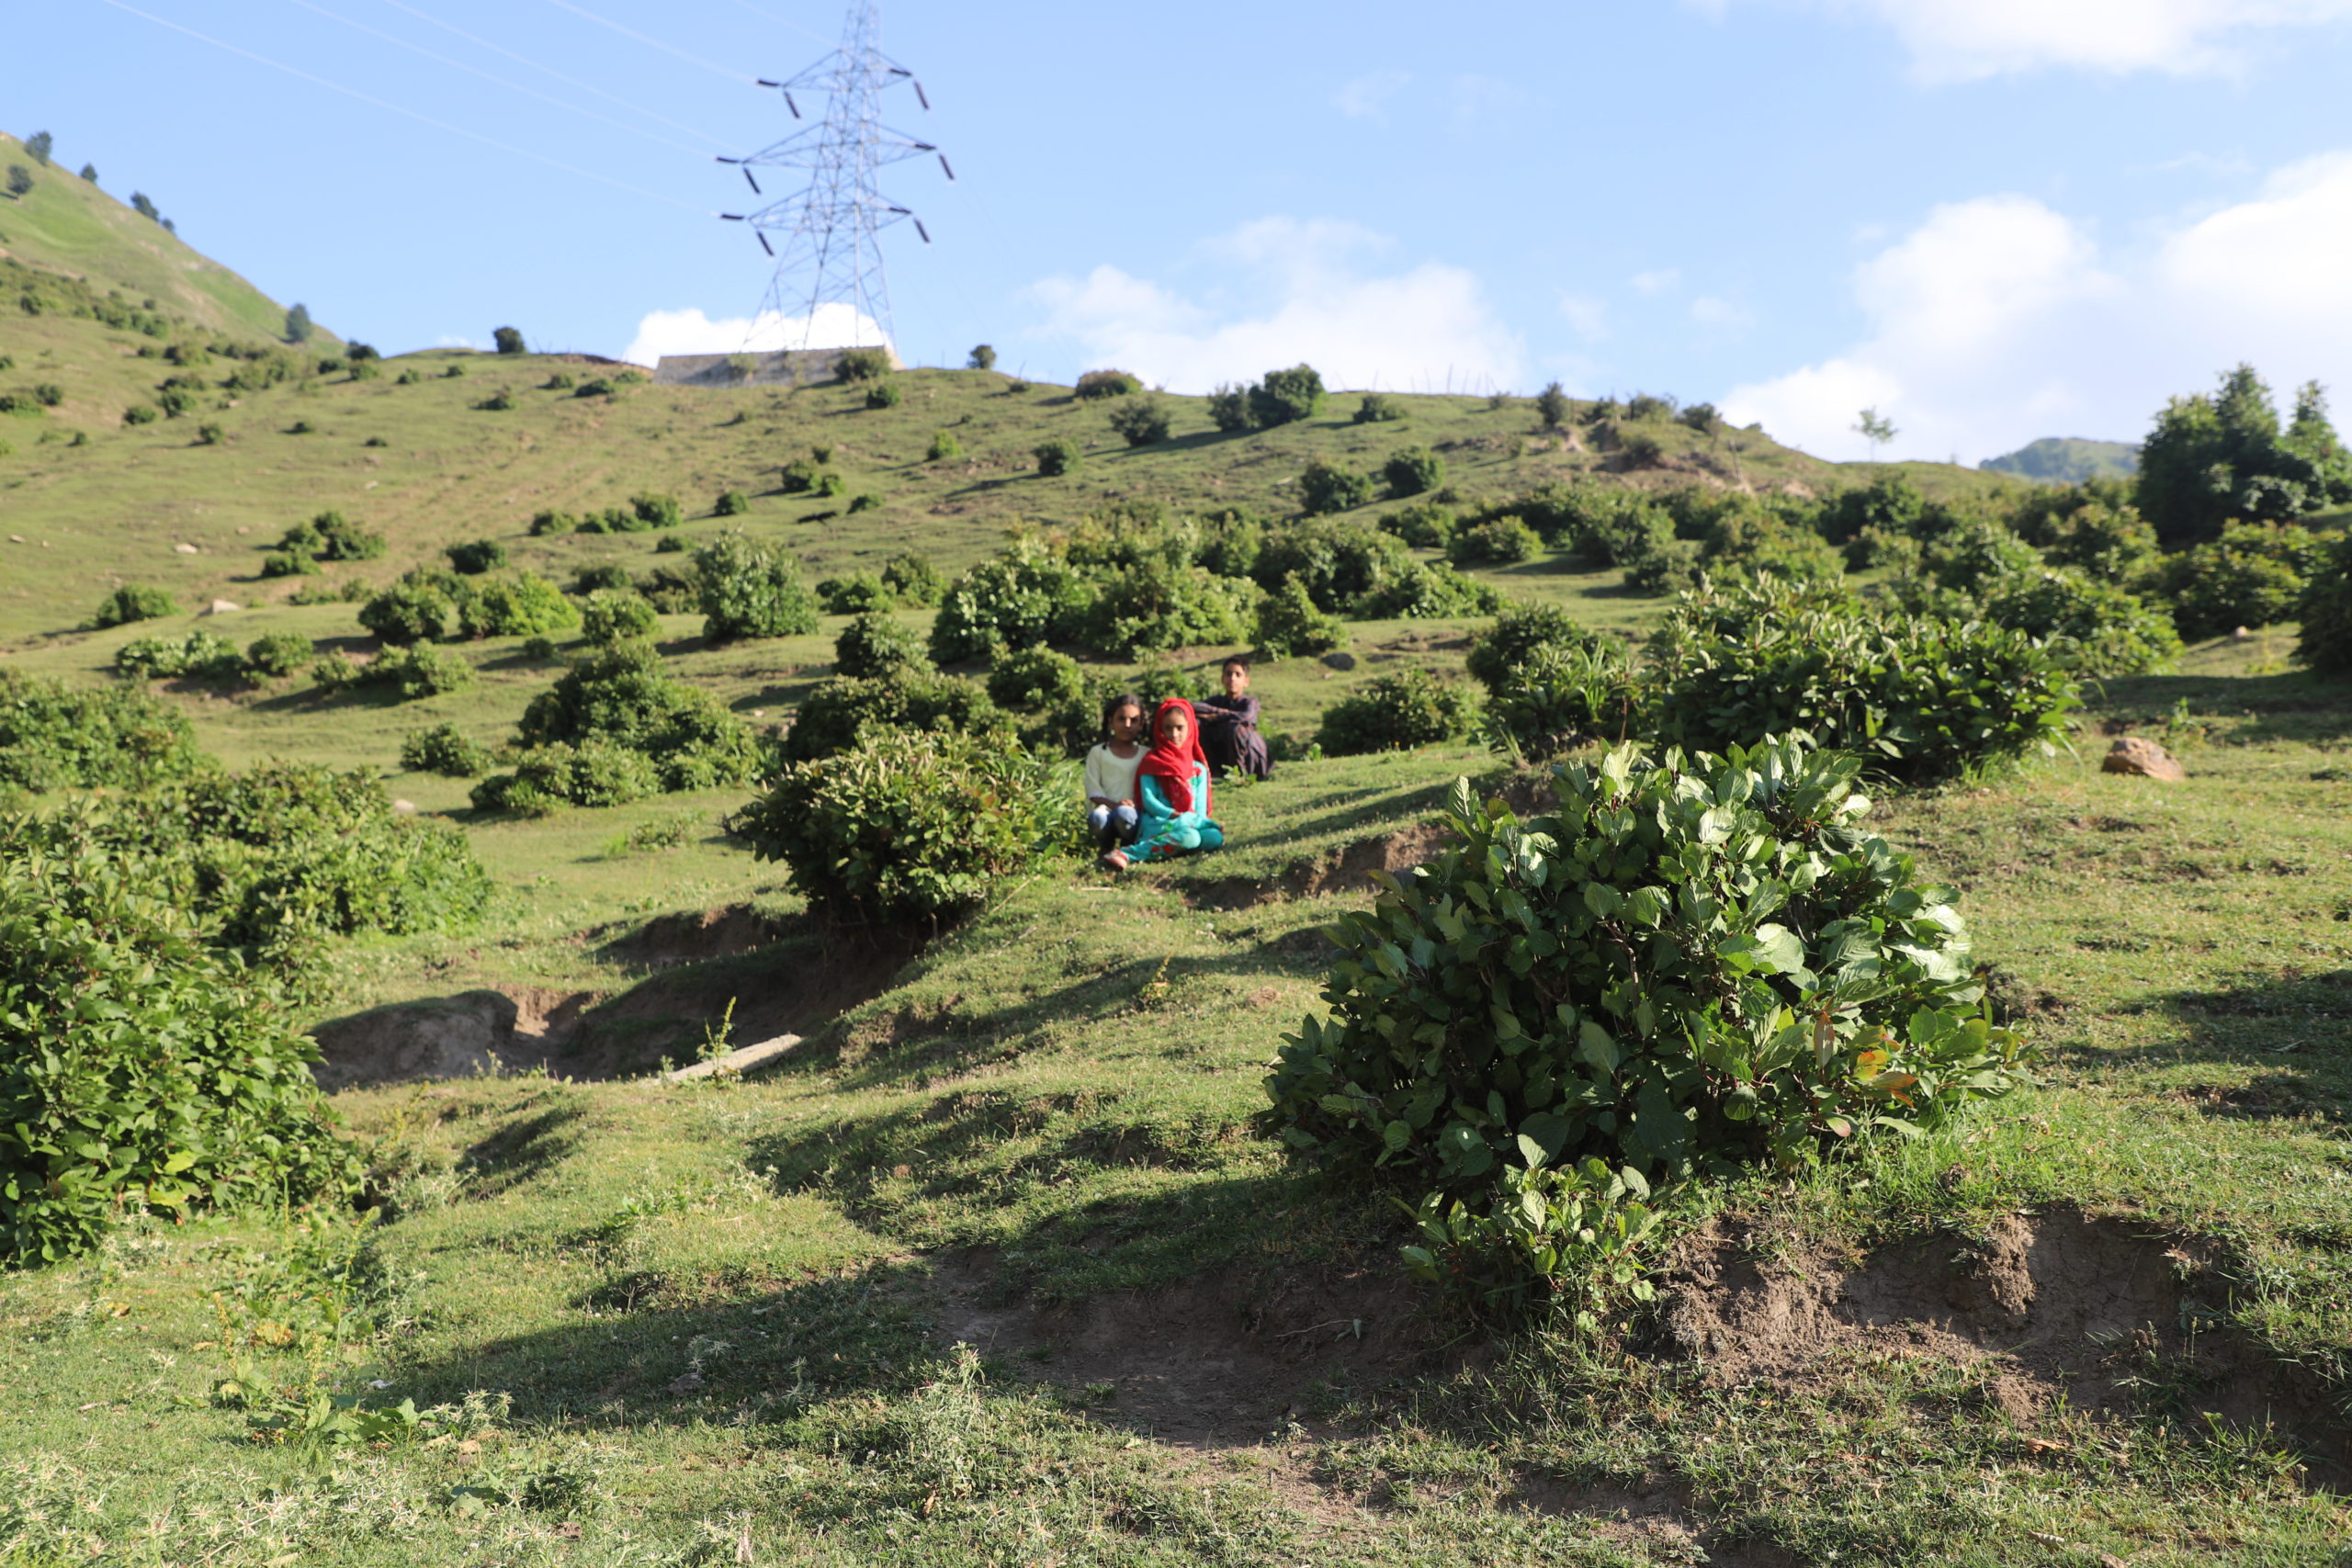 children sitting in grassy, hilly area surrounded by shrubs